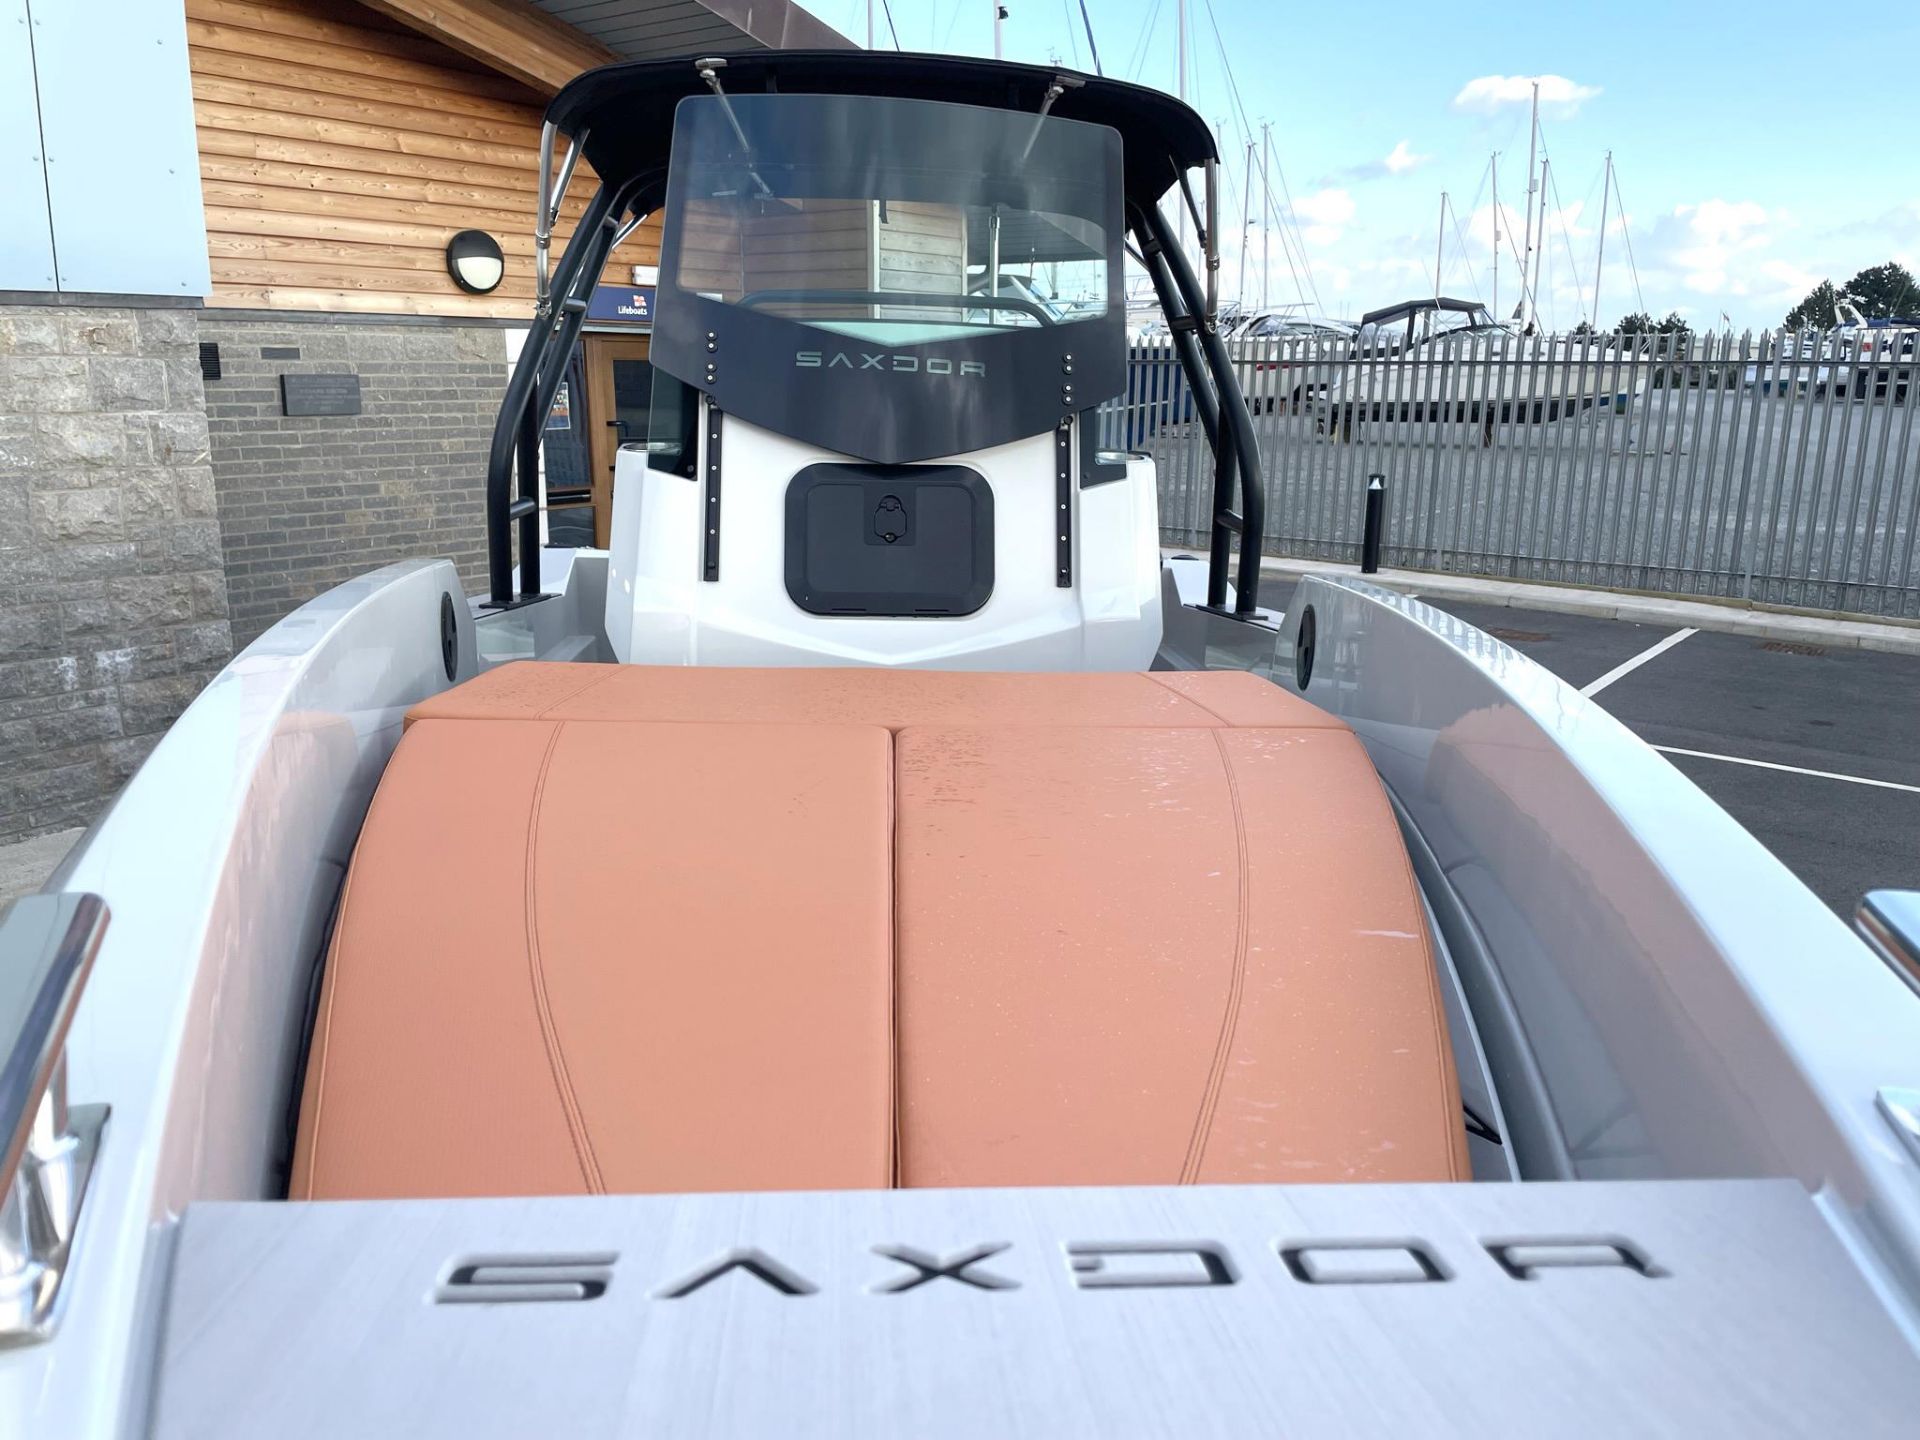 Fantastic opportunity to own a highly desirable watercraft AND support the RNLI Charity - Image 16 of 23